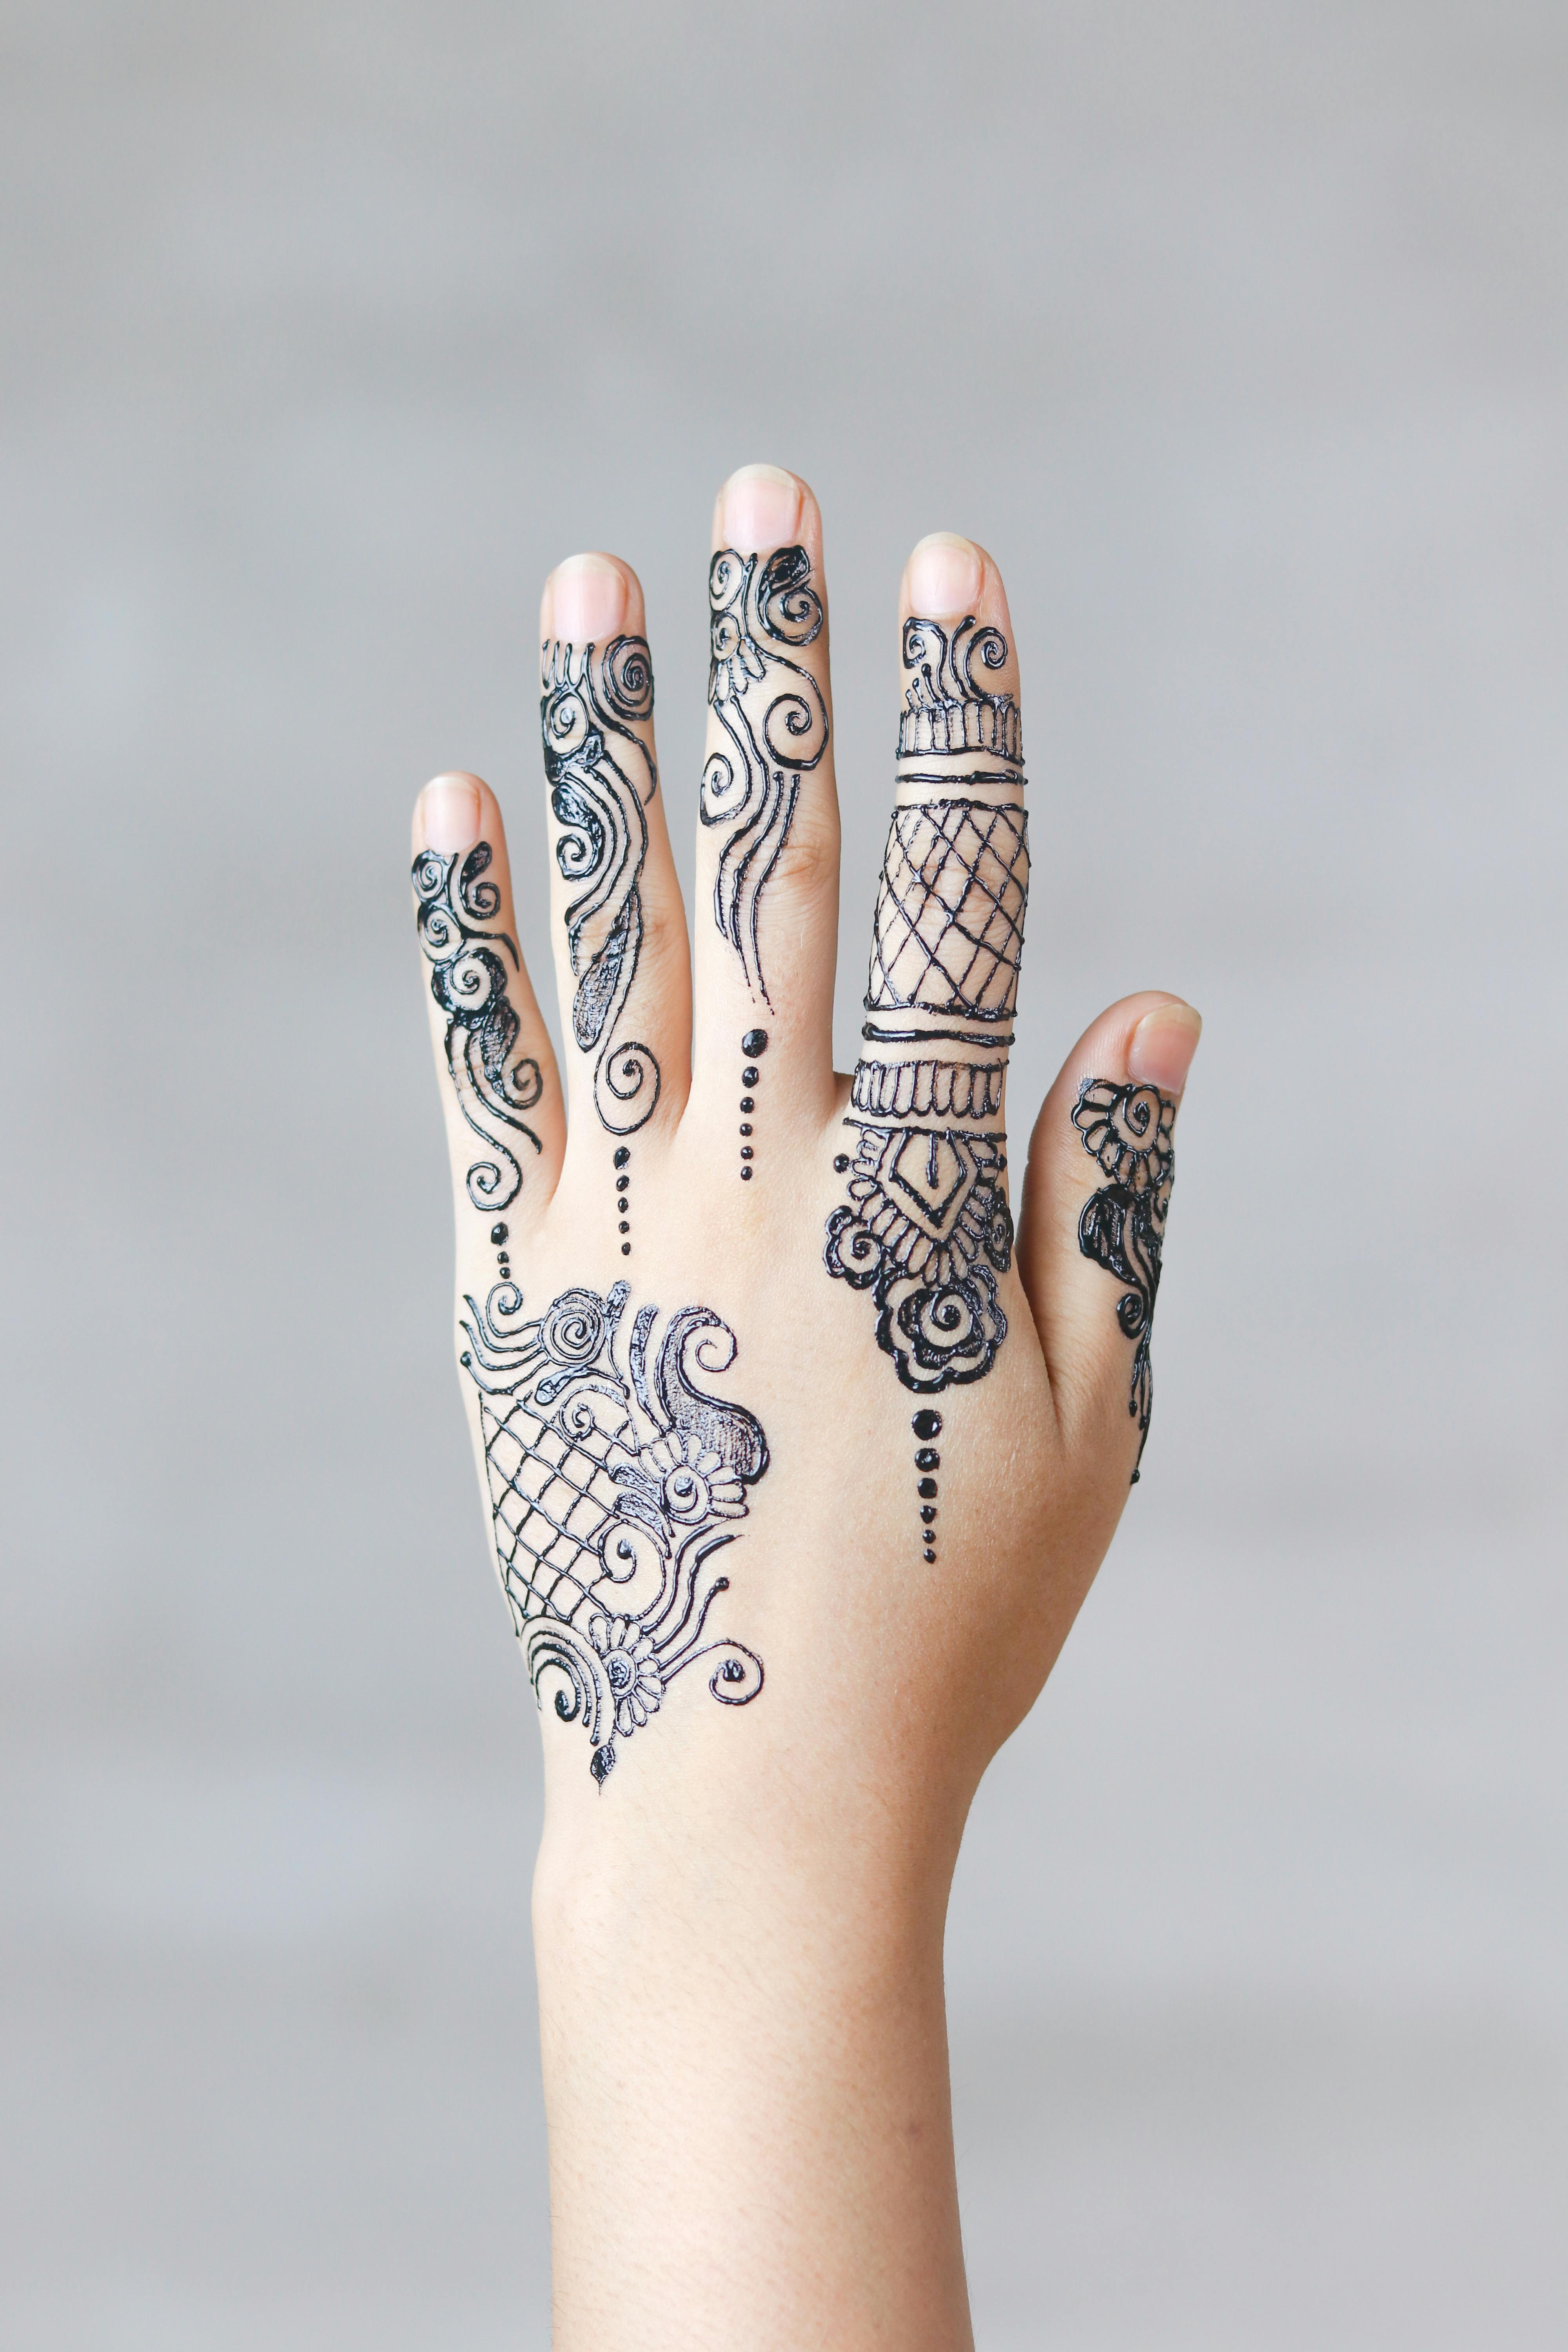 Families In Bali Warned About Dangers Of Black Henna Tattoos As Another  Child Is Left Scarred - The Bali Sun